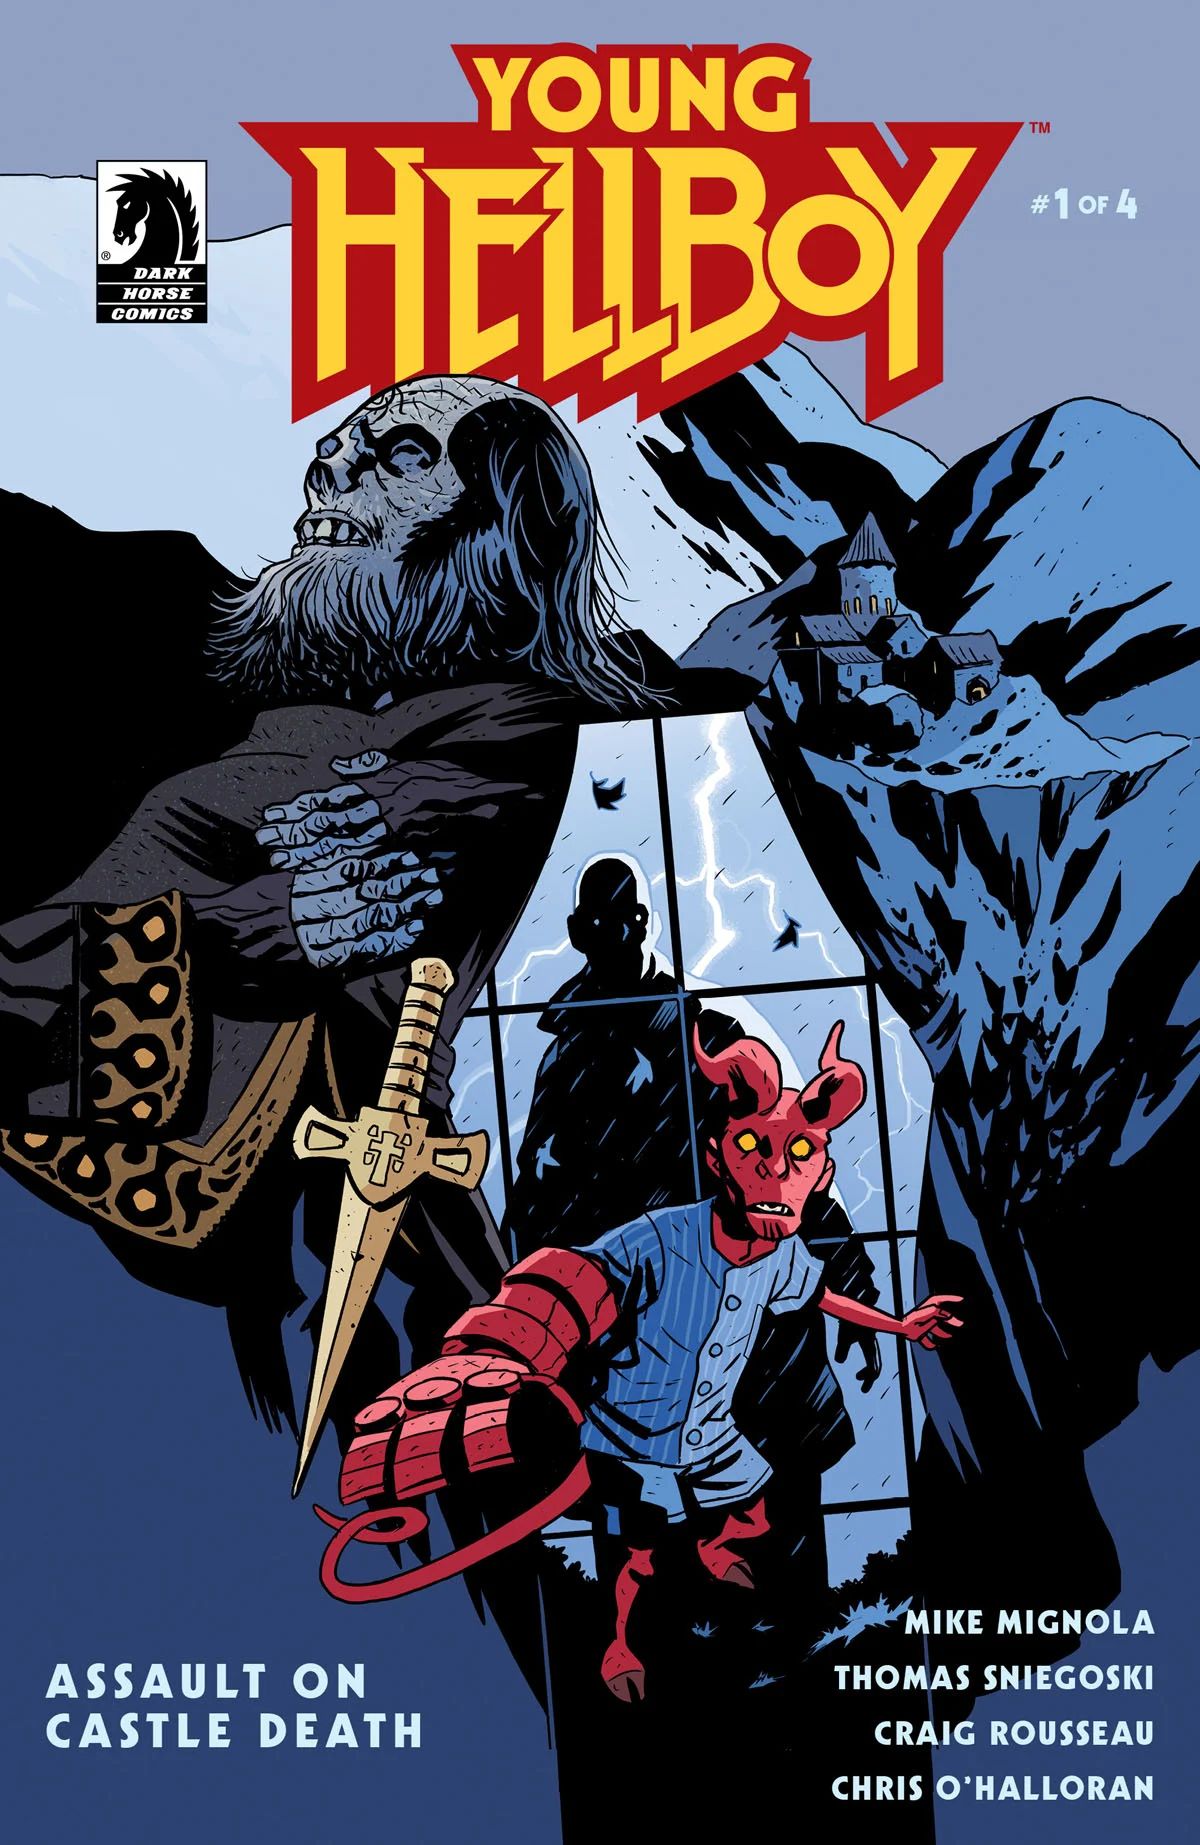 Young-Hellboy-Assault-on-Castle-Death-Cover-A